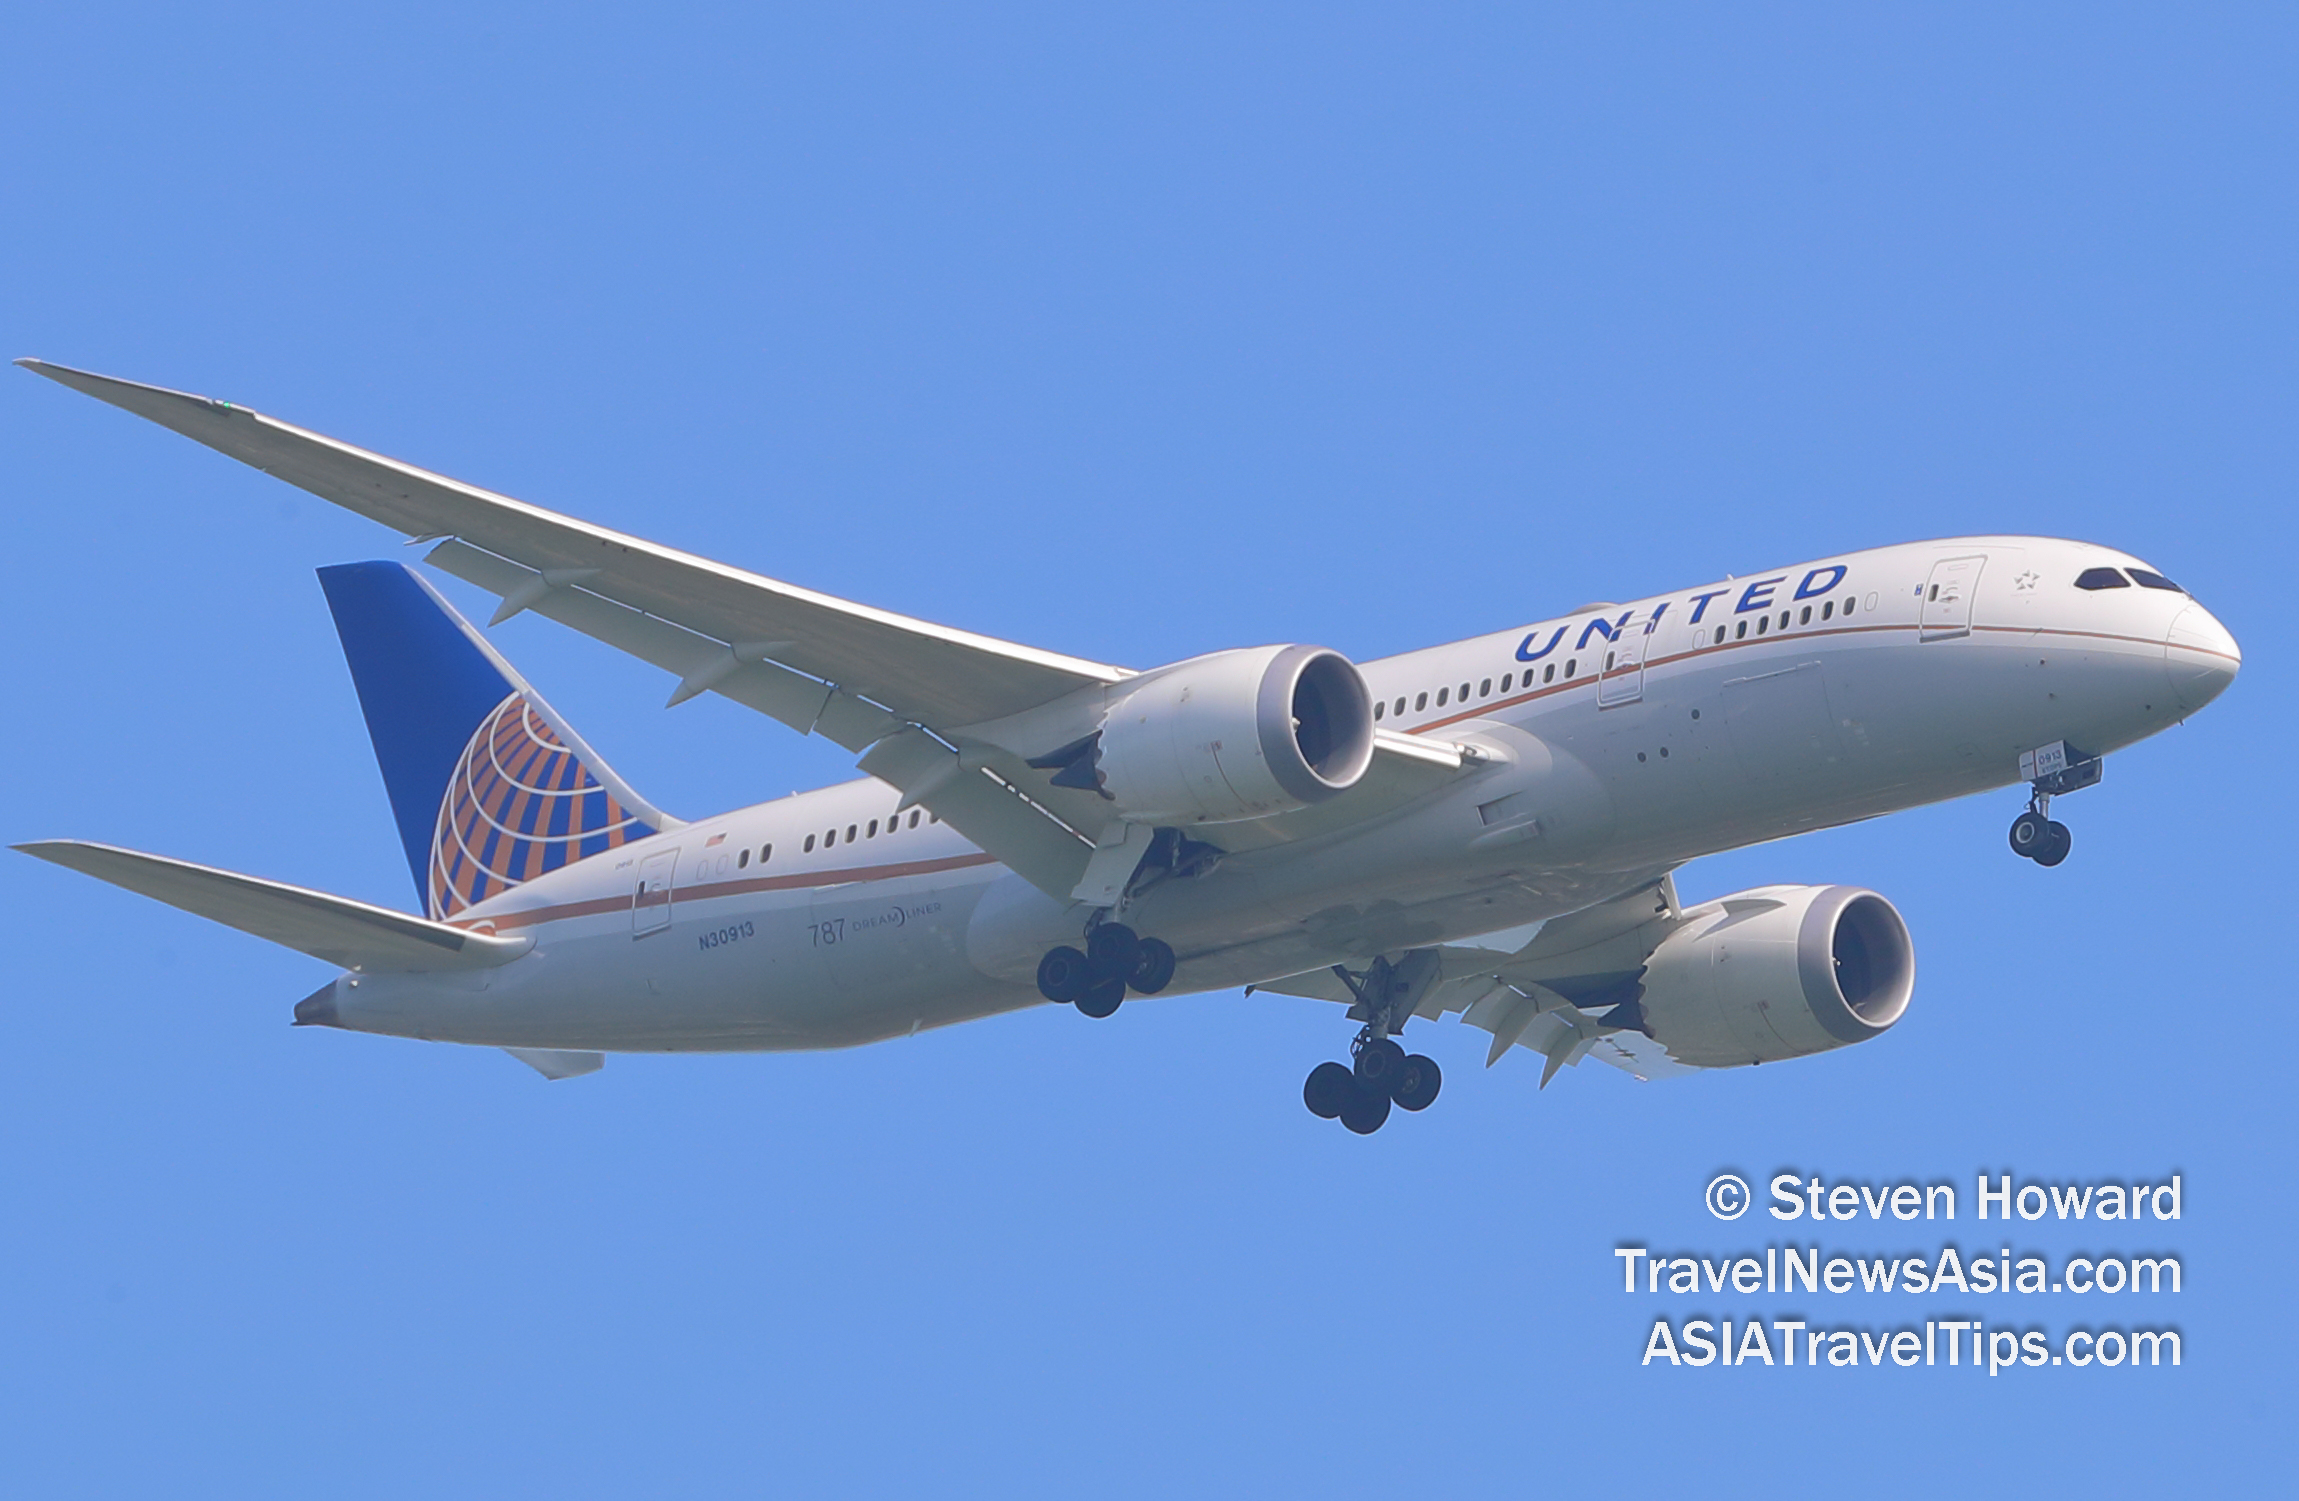 United Airlines Boeing 787-8 reg: N-30913. Picture by Steven Howard of TravelNewsAsia.com Click to enlarge.